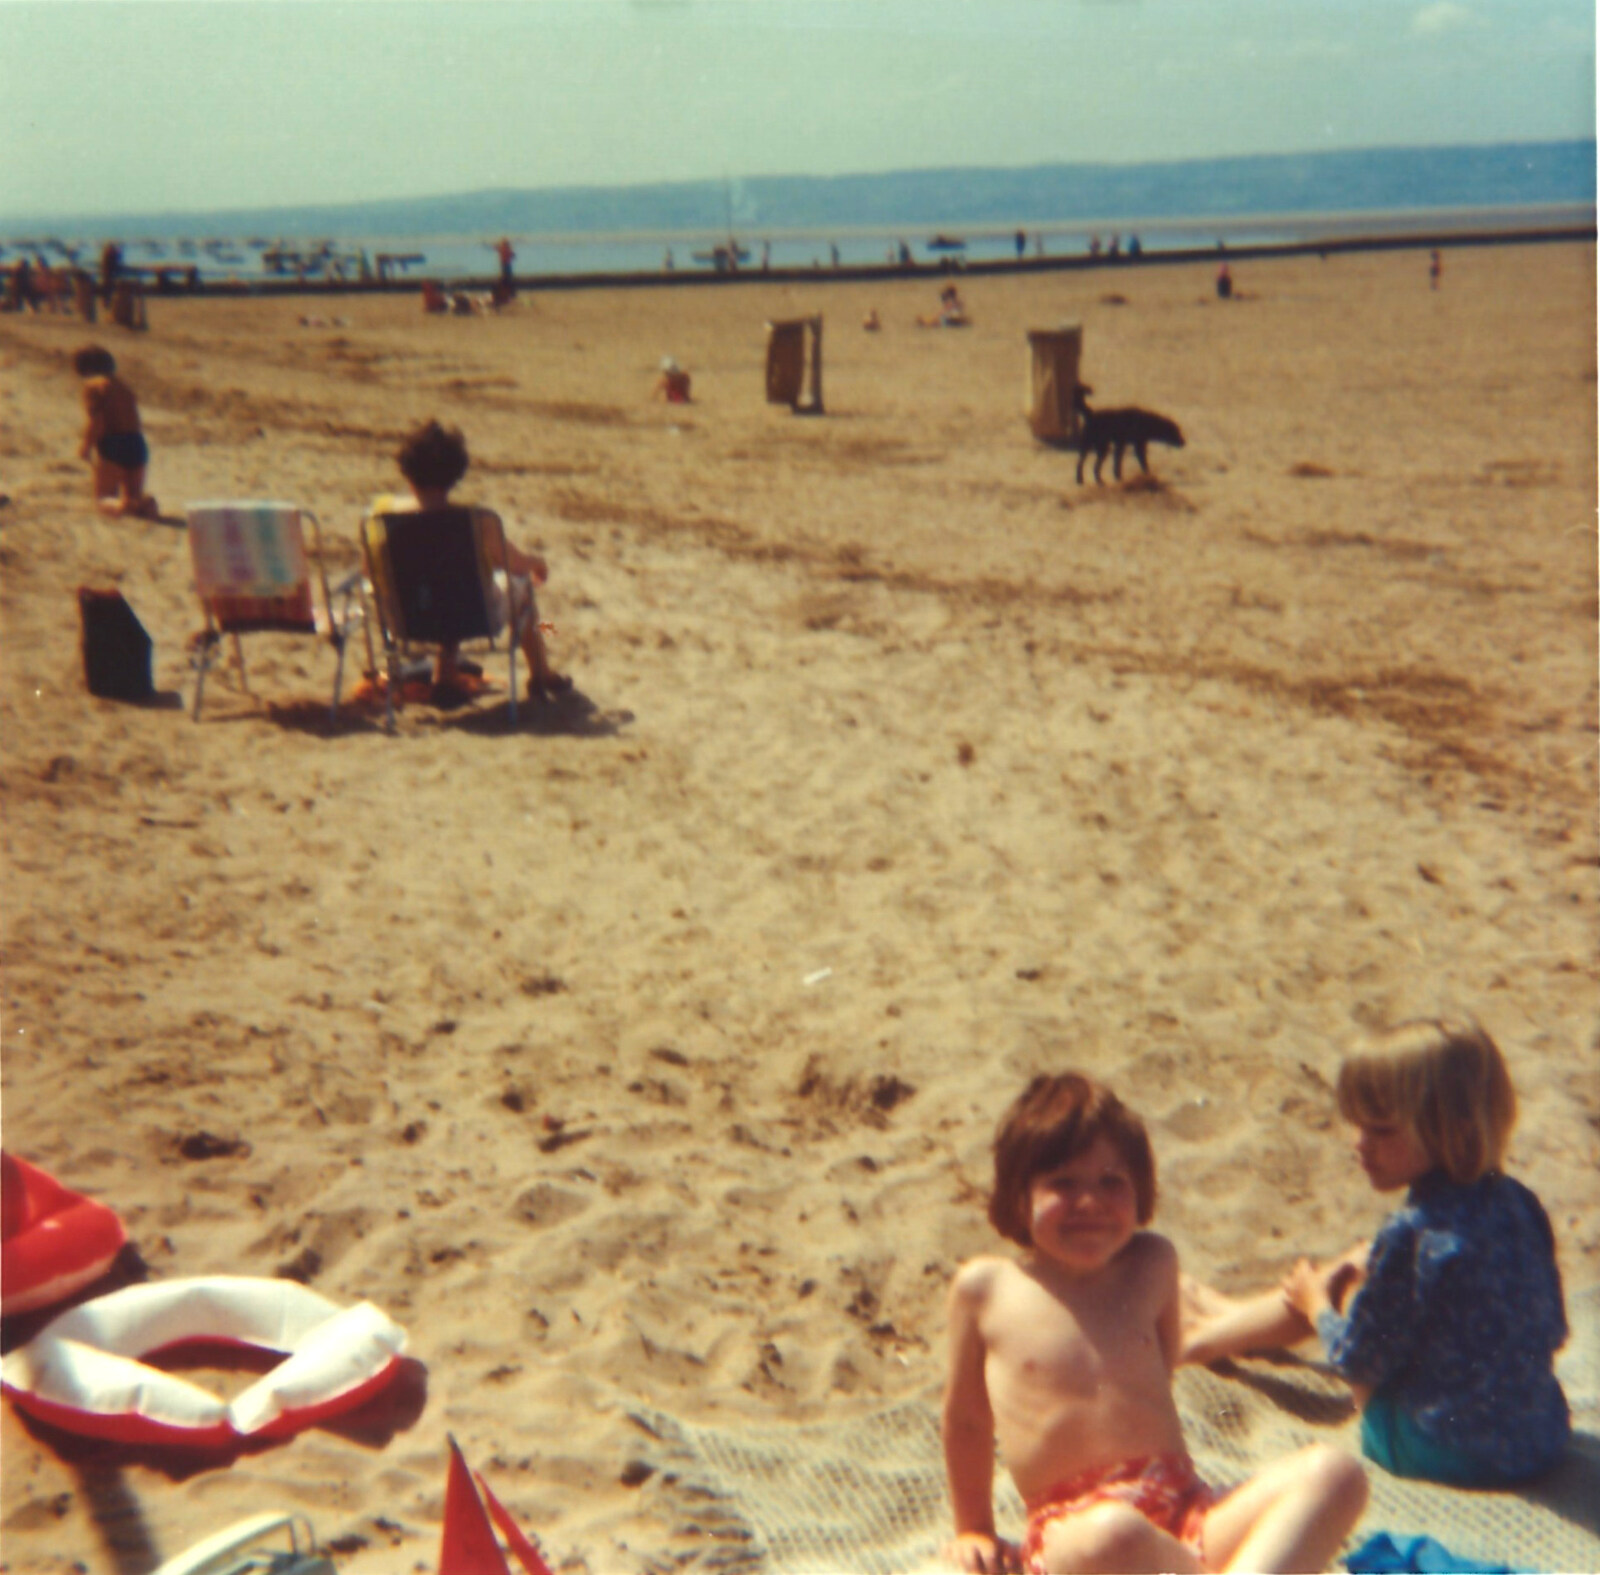 On a beach somewhere from Family History: The 1970s, Timperley and Sandbach, Cheshire - 24th January 2020